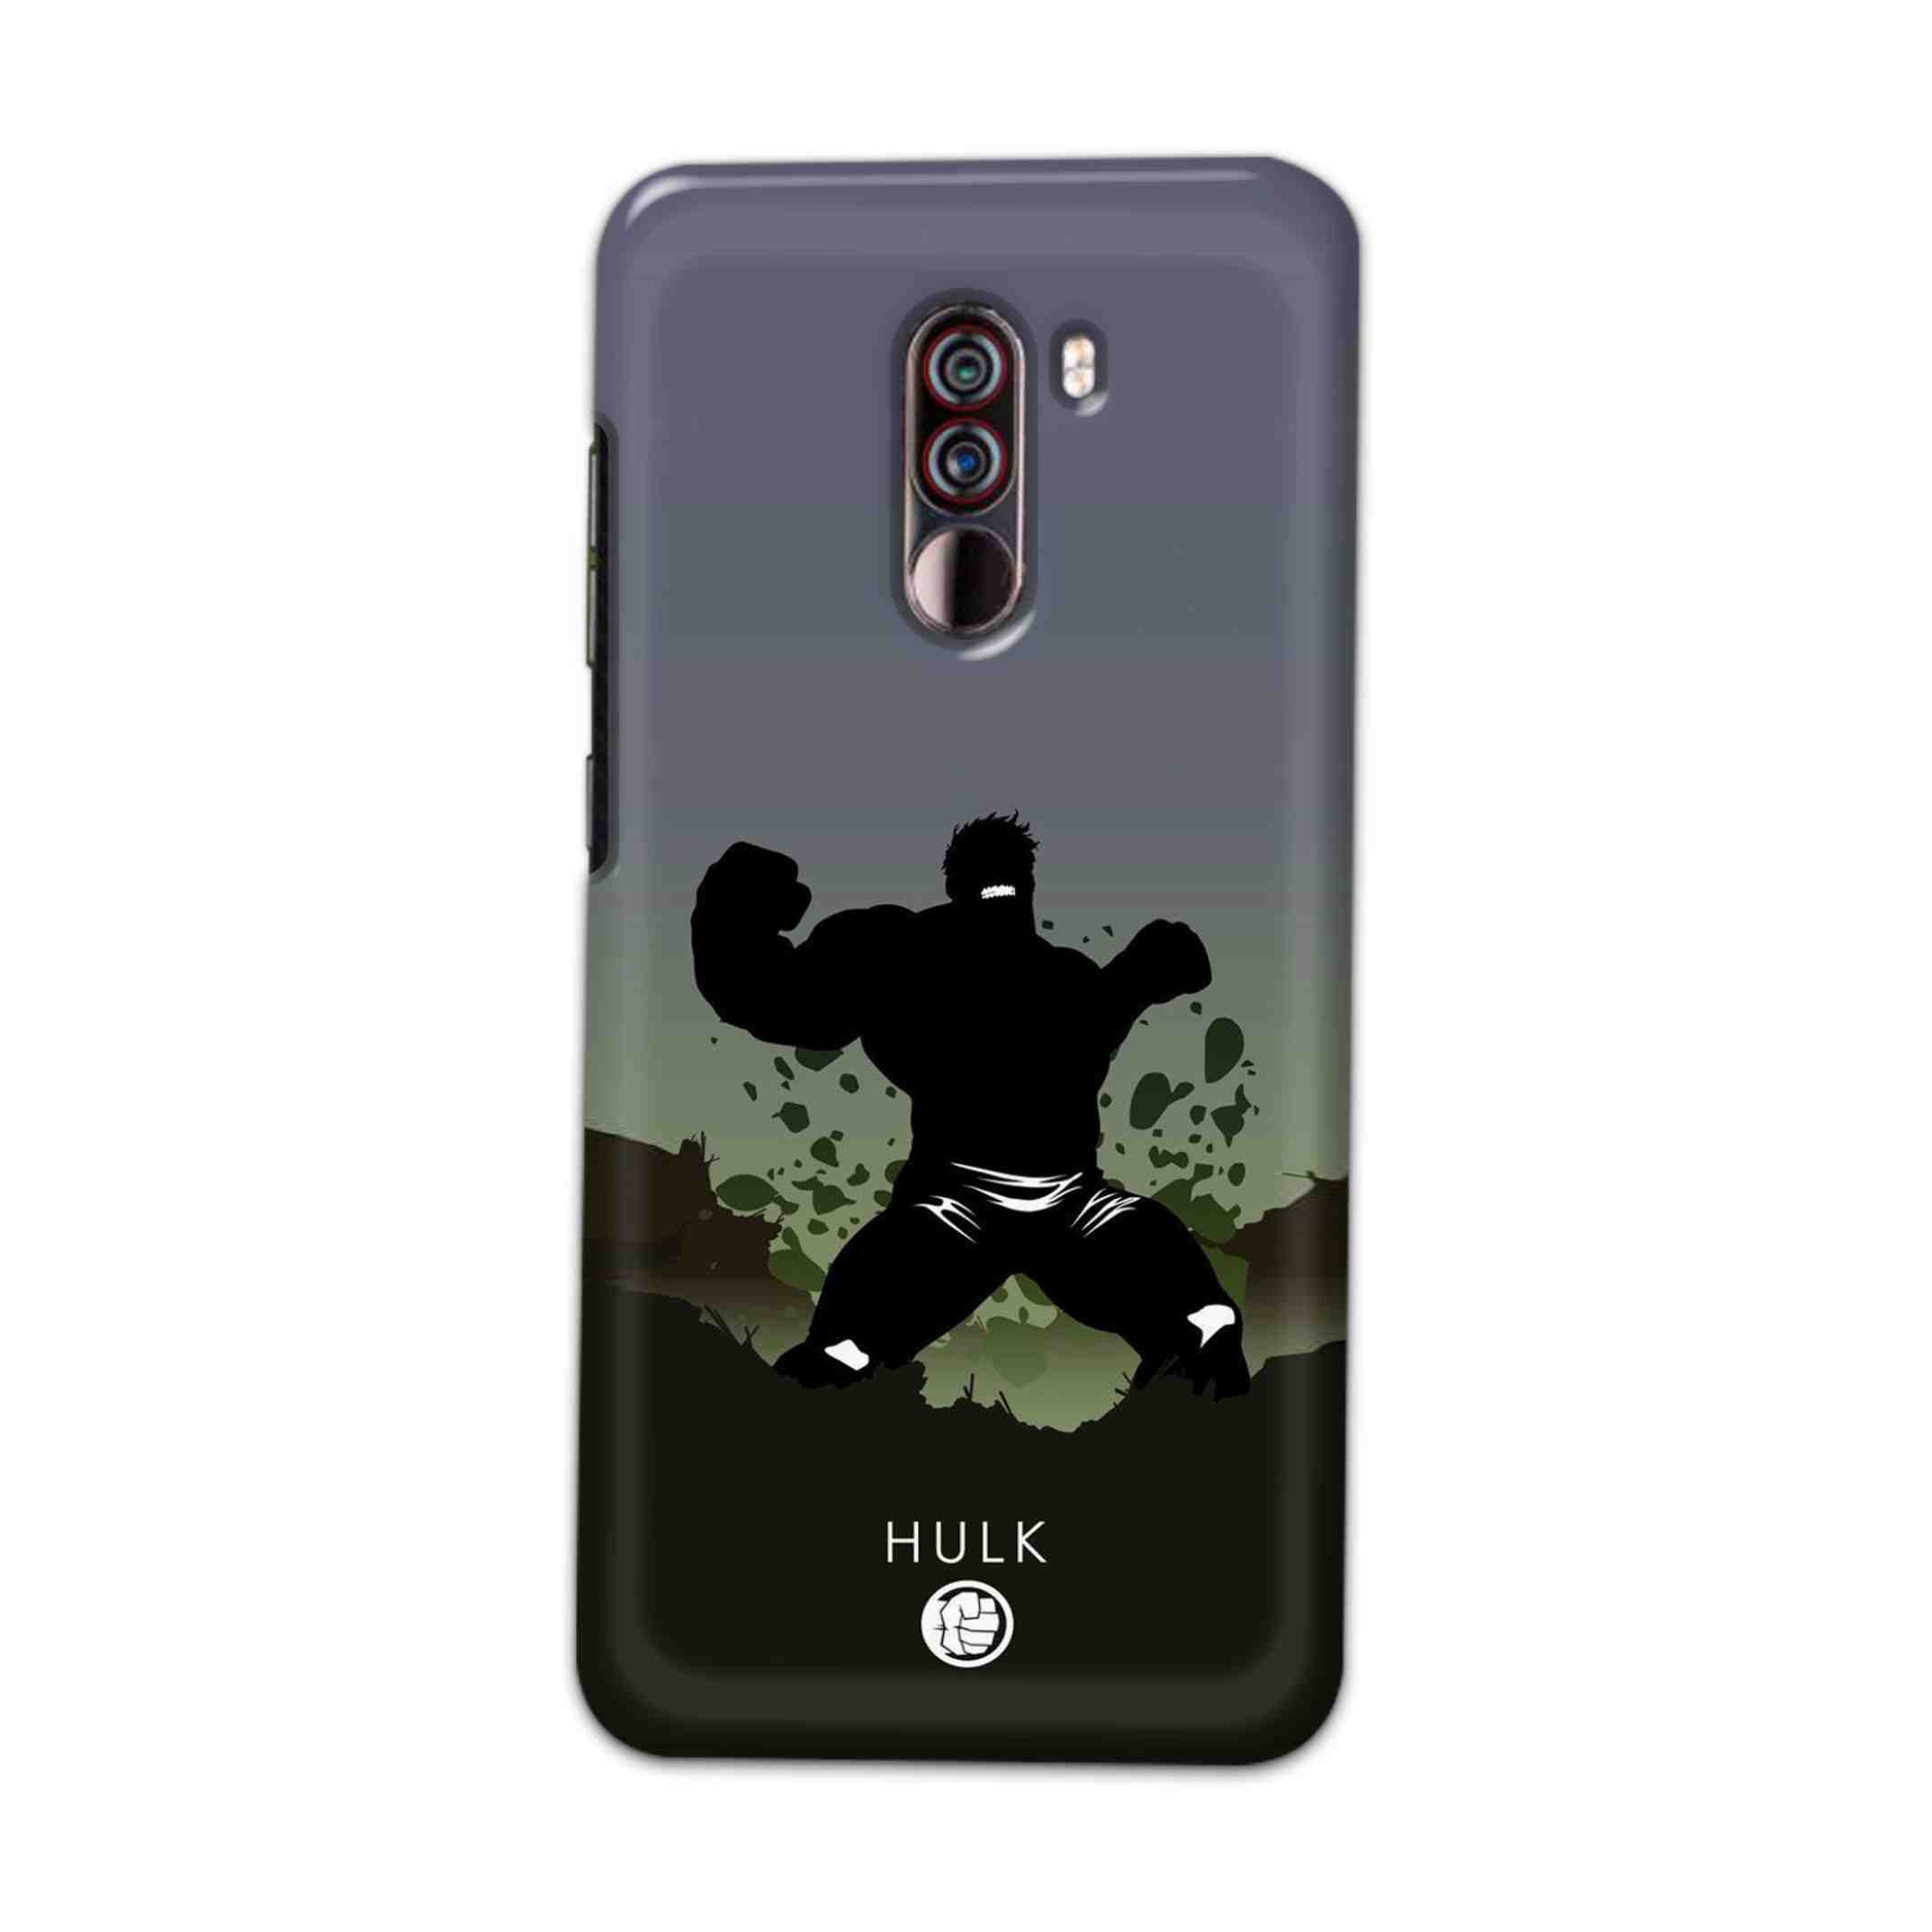 Buy Hulk Drax Hard Back Mobile Phone Case Cover For Xiaomi Pocophone F1 Online